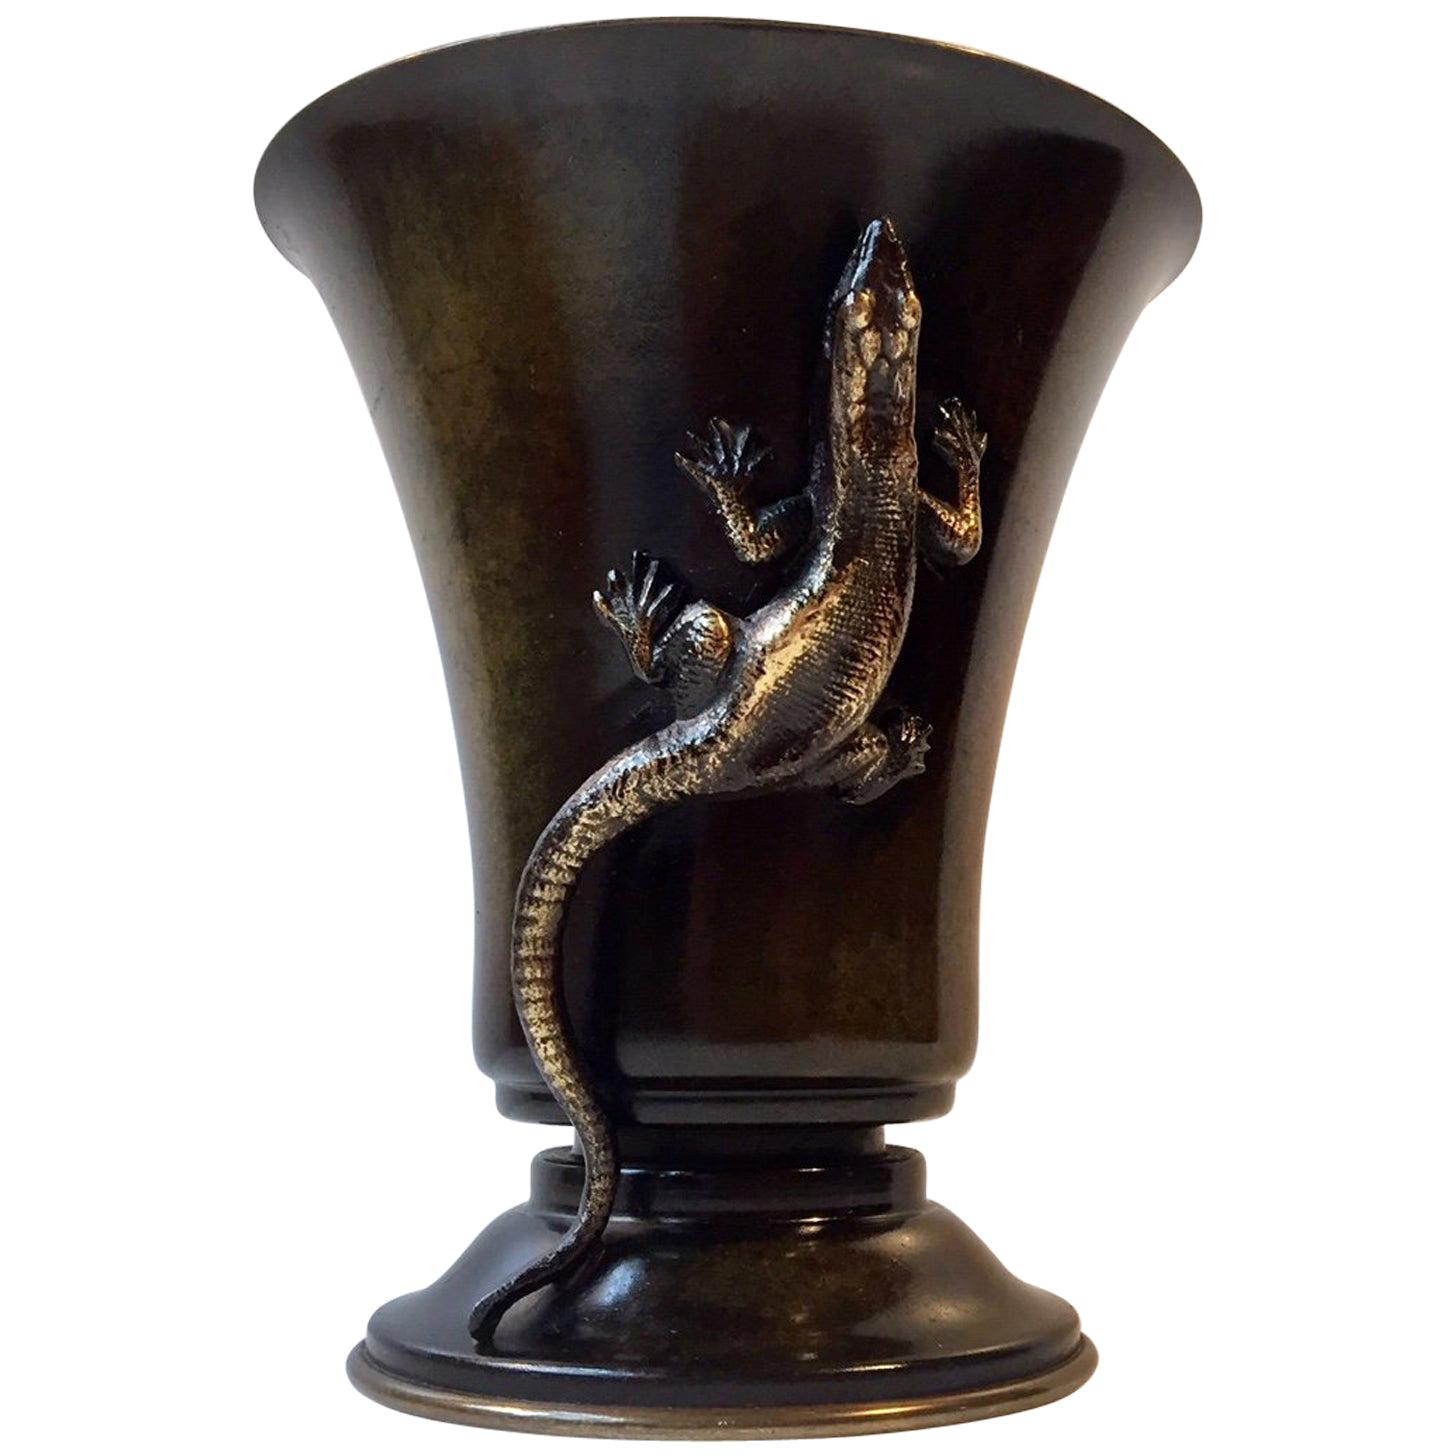 Patinated Art Deco Bronze Vase with Lizard by Holger Fredericia, Denmark, 1930s